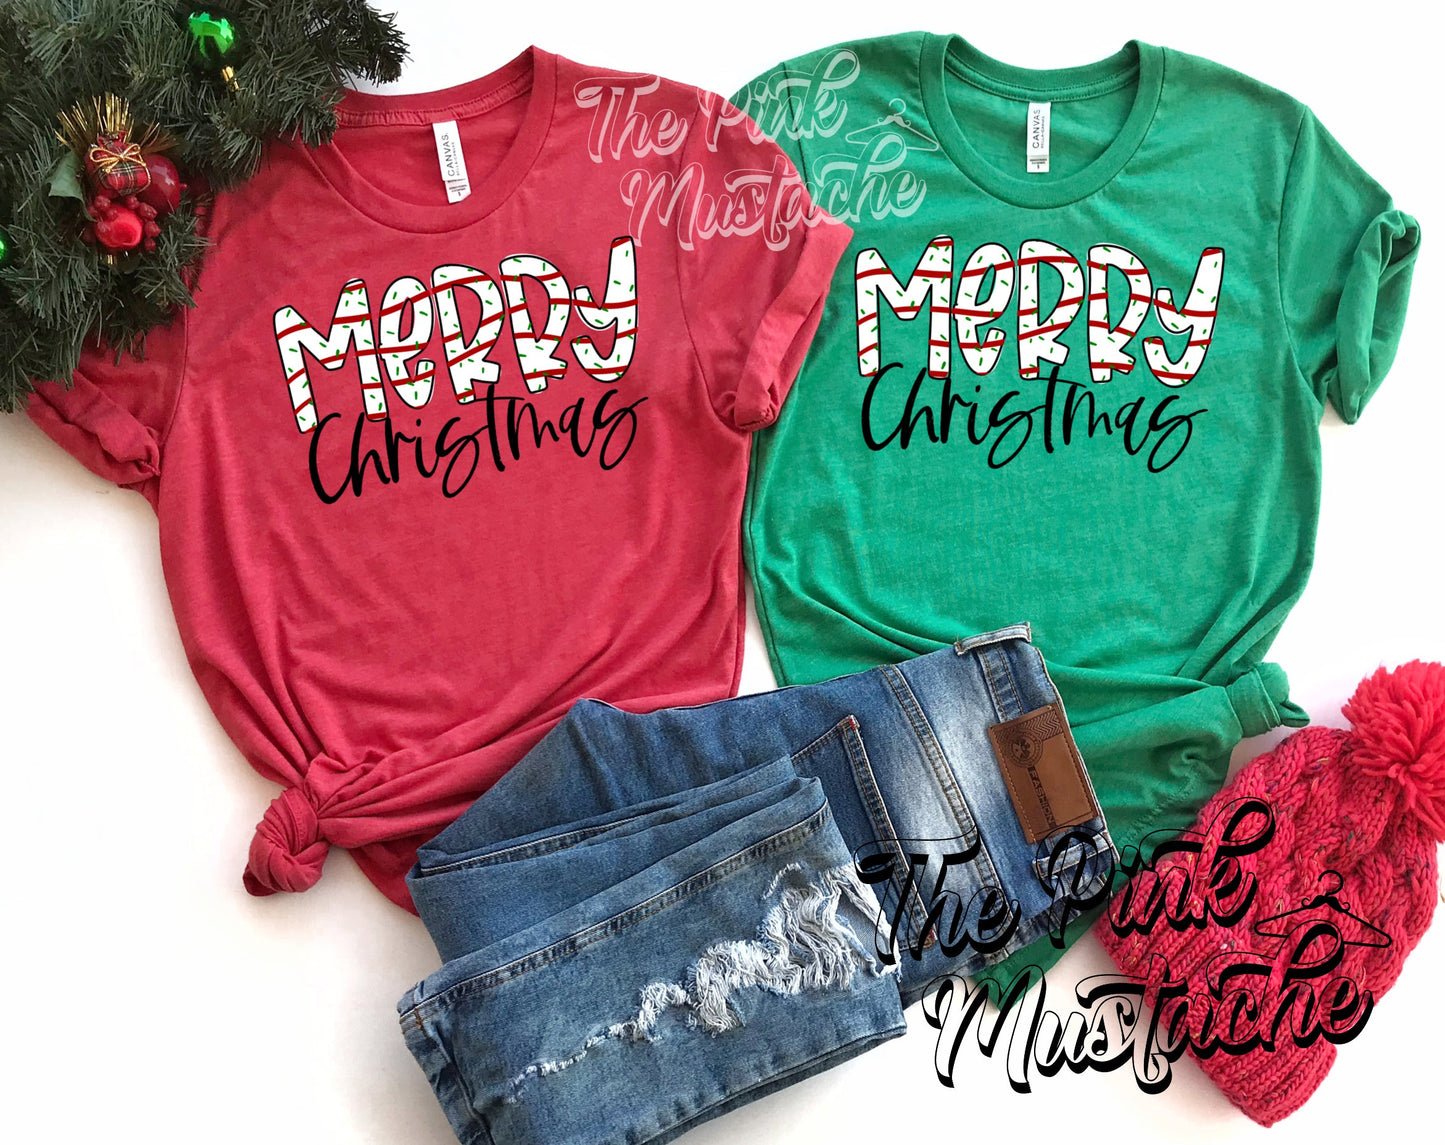 Merry Christmas Yummy Christmas Trees Tee/ Super Cute Unisex Sized Shirt/ Youth and Adult Options